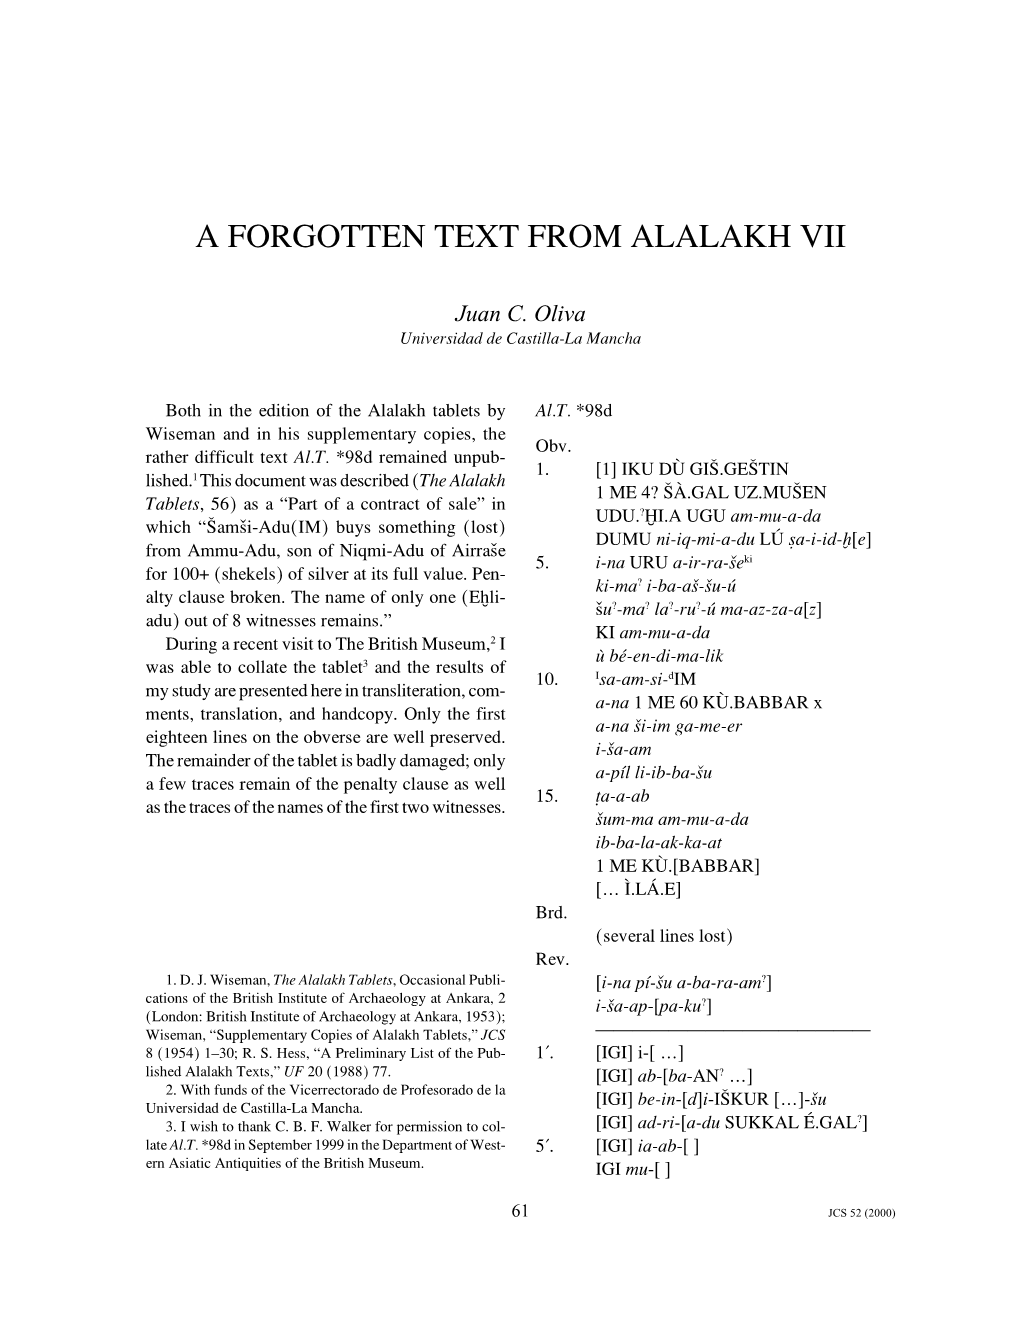 A Forgotten Text from Alalakh Vii